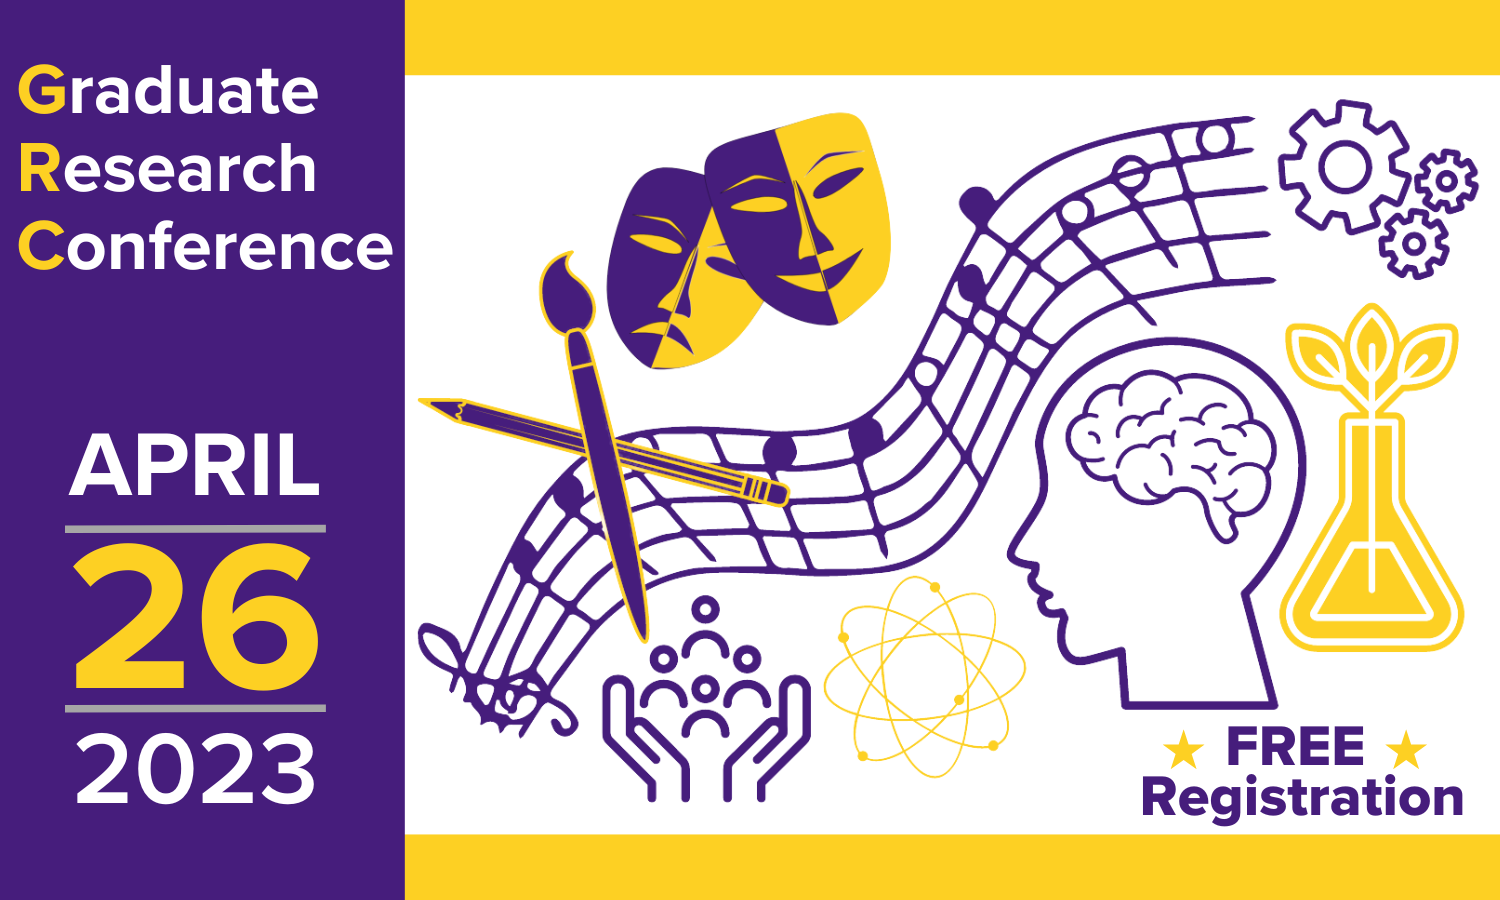 Graduate Research Conference, Research and Artistic Expression for Graduate Students; April 26, 2023, 8;00 am - 5:00 pm, LSU Student Union;  Free Registration; Abstract Submission Deadline: March 20